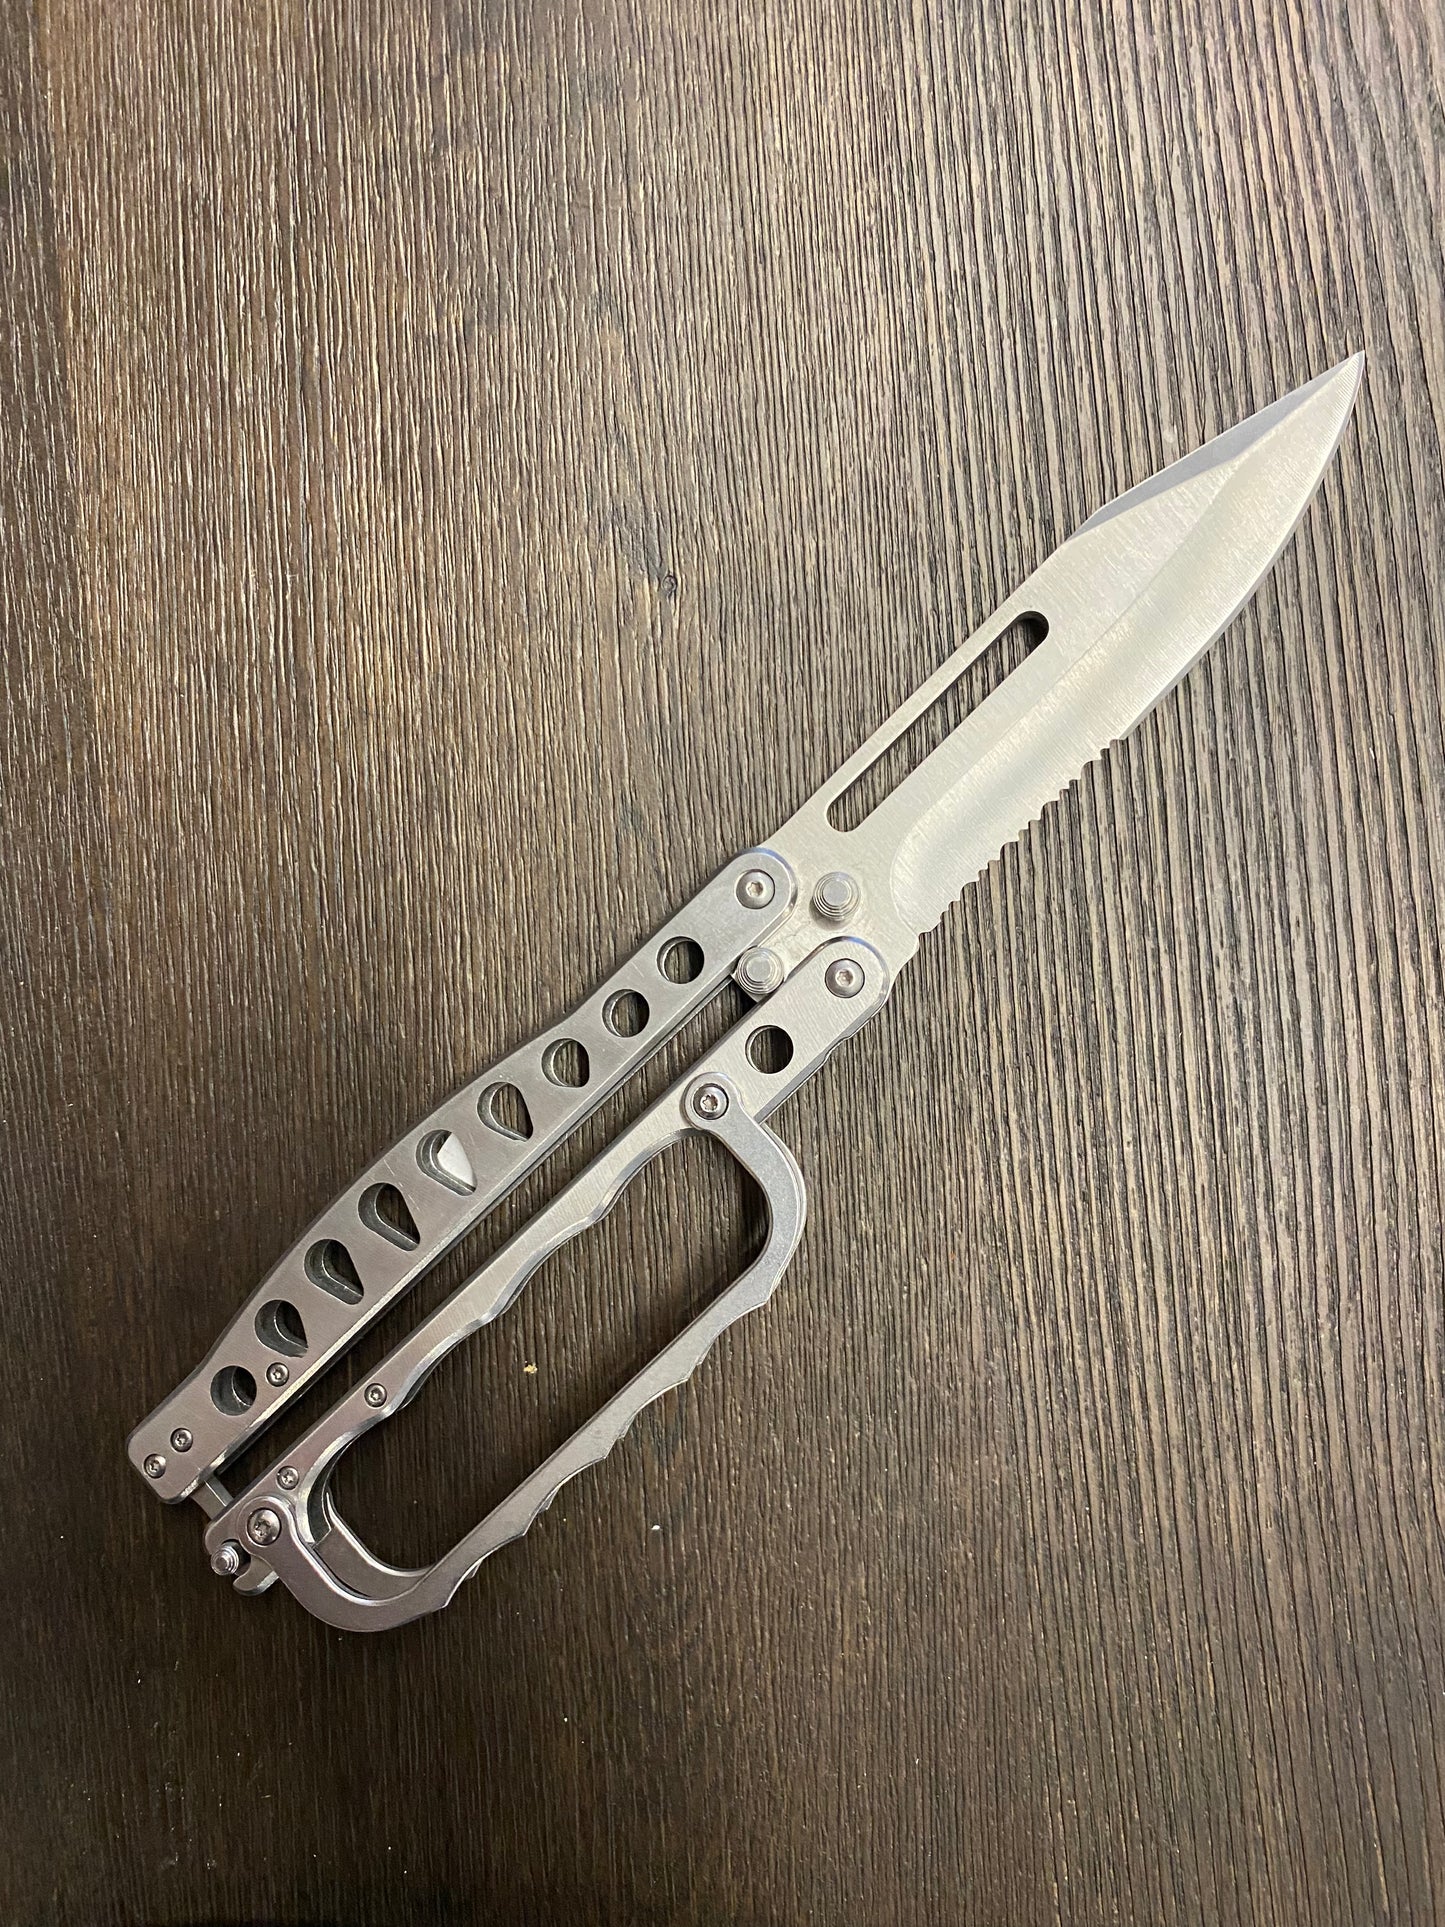 Butterfly Knife with Knuckles